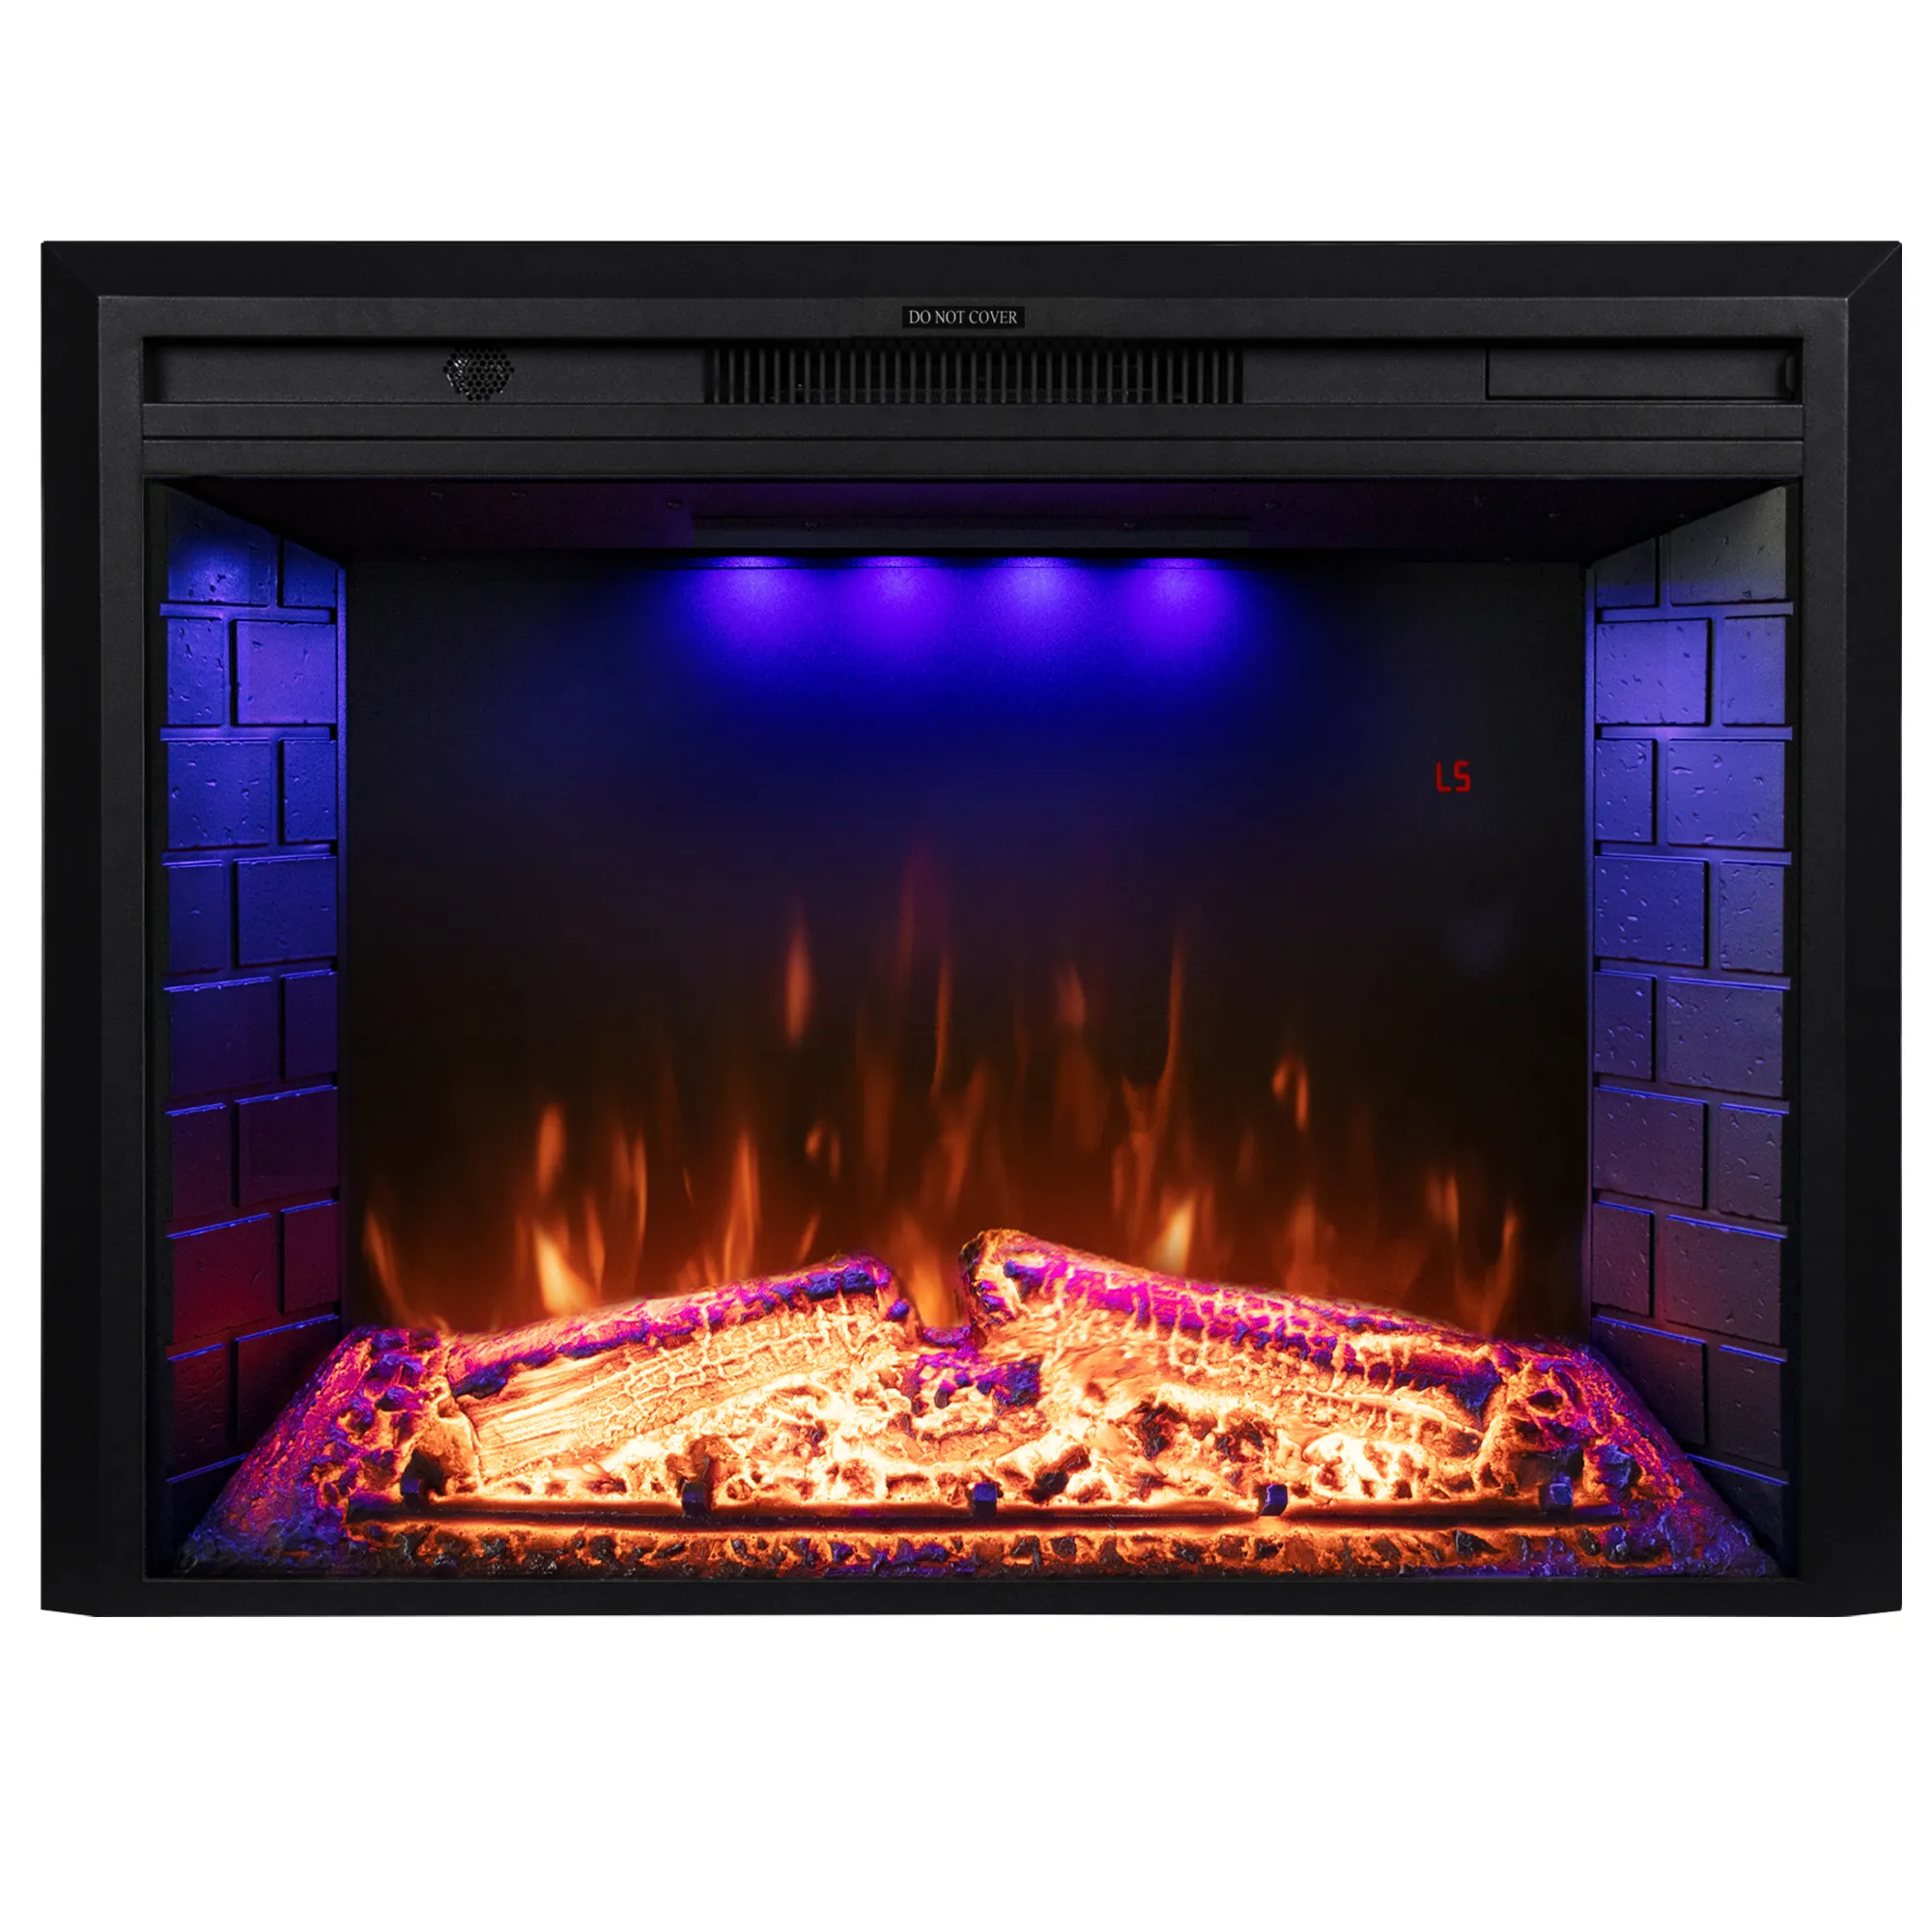 Luxstar 36 Inch Household Smart Artificial LED Electrical Fireplace Insert Heaters with Sfeerhaard Decor Realist Flame Effect